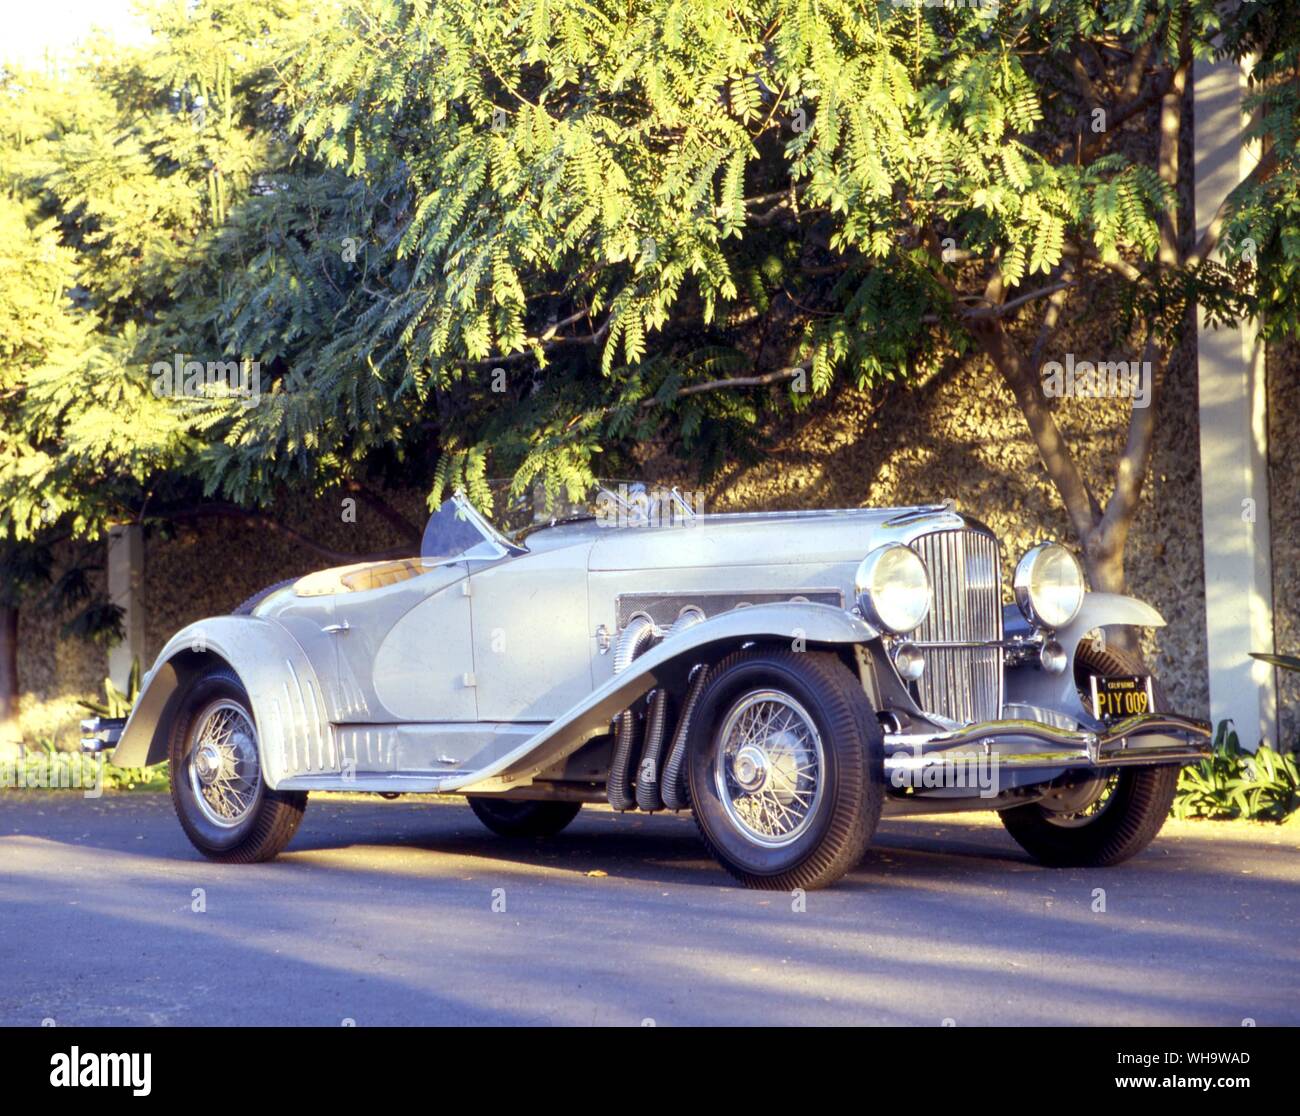 Gary Cooper 'SSJ' (or 'SS SJ') Duesenberg was tuned to 400bhp to race Groucho Marx's Mercedes Stock Photo